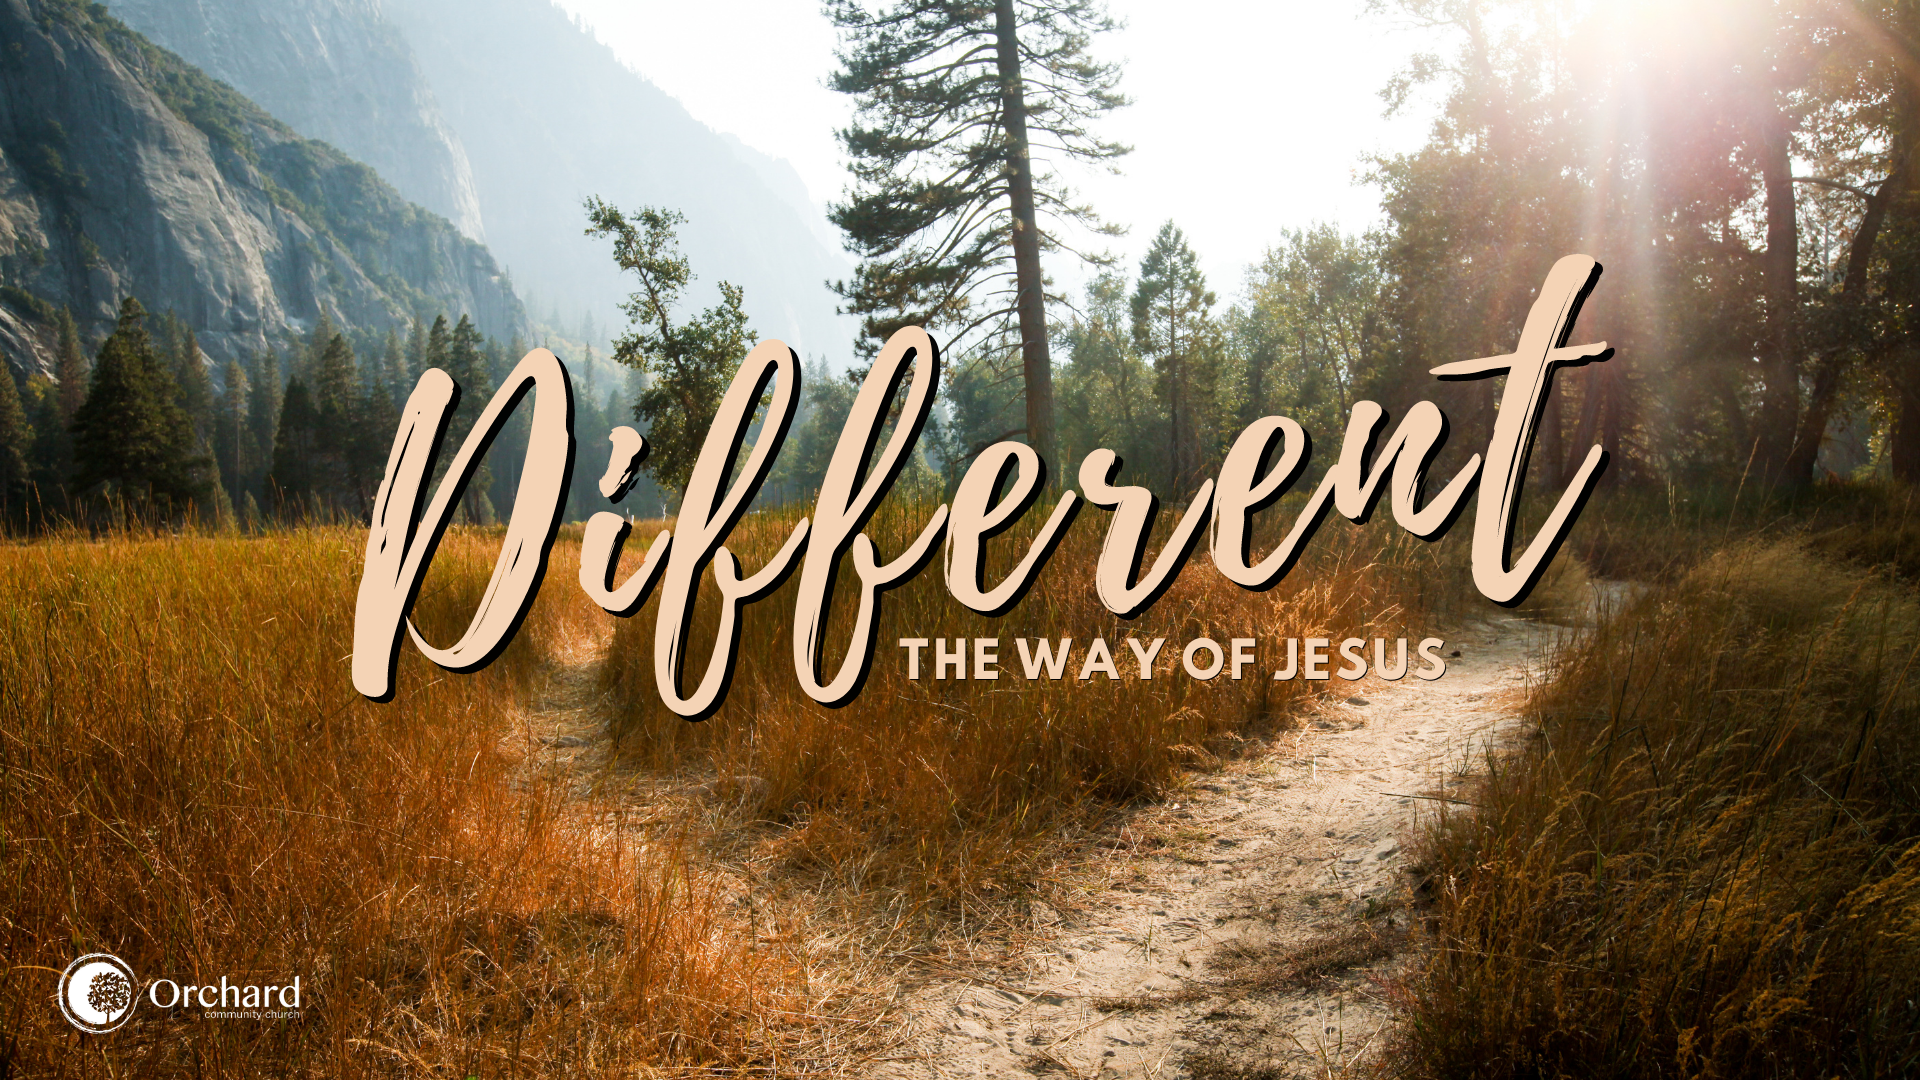 Different: The Way of Jesus